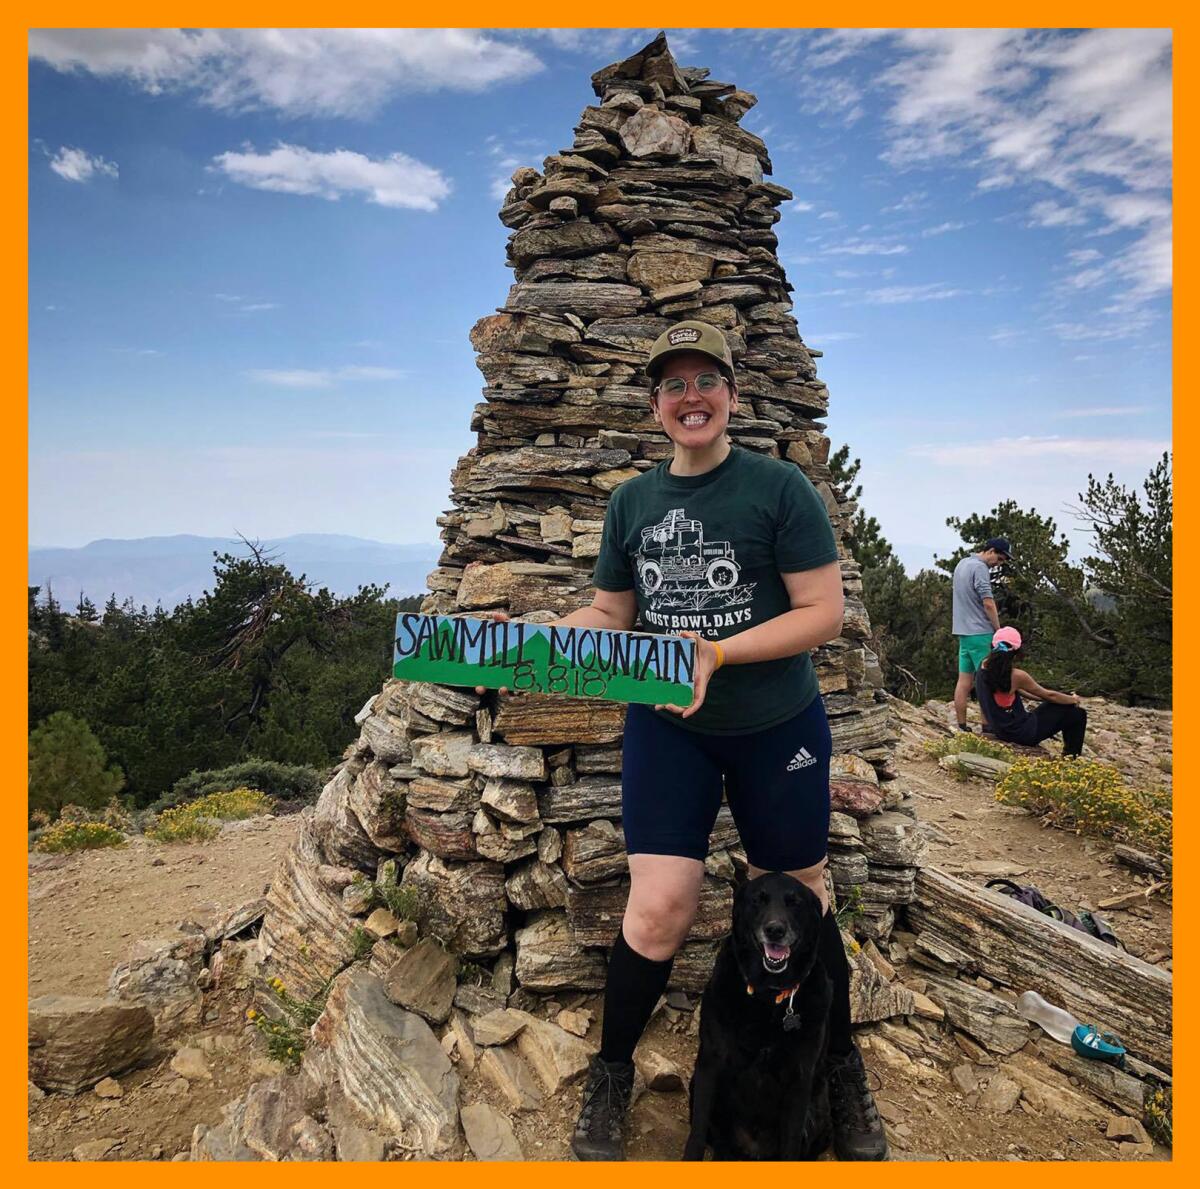 A person holds a sign that says Sawmill Mountain in front of a pile of stacked rocks and next to a dog.